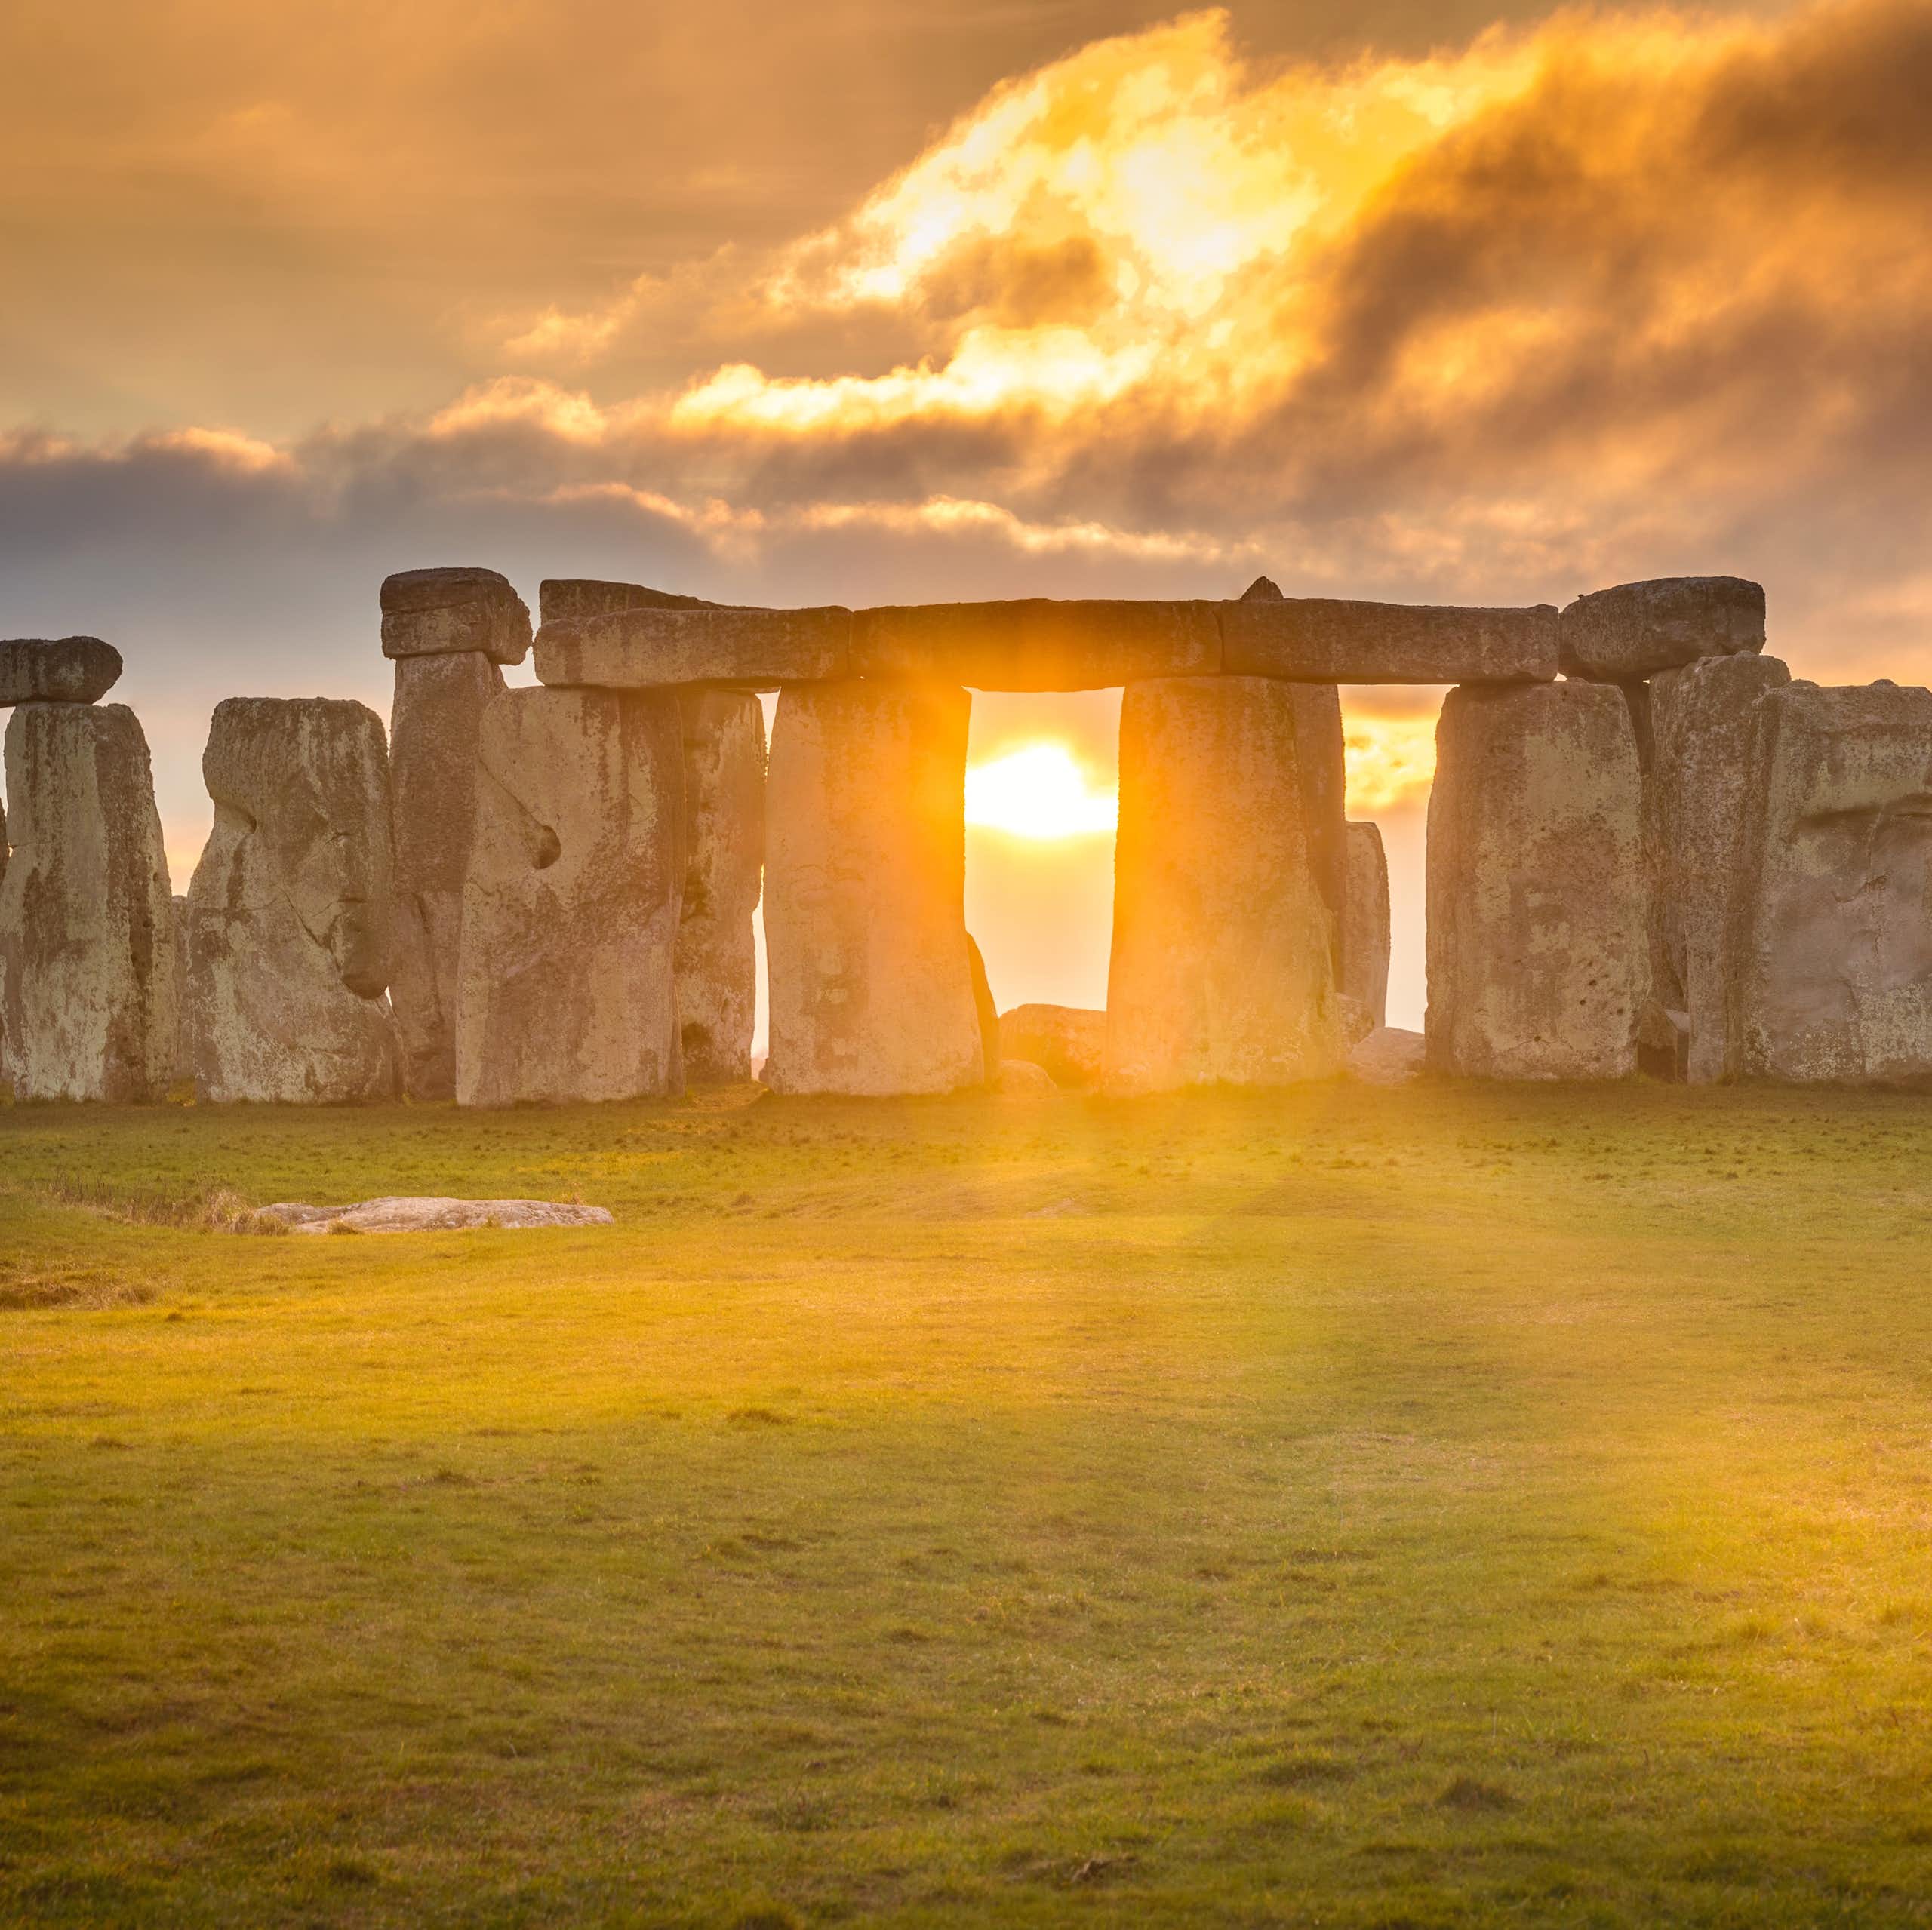 Stonehenge may have aligned with the Moon as well as the Sun